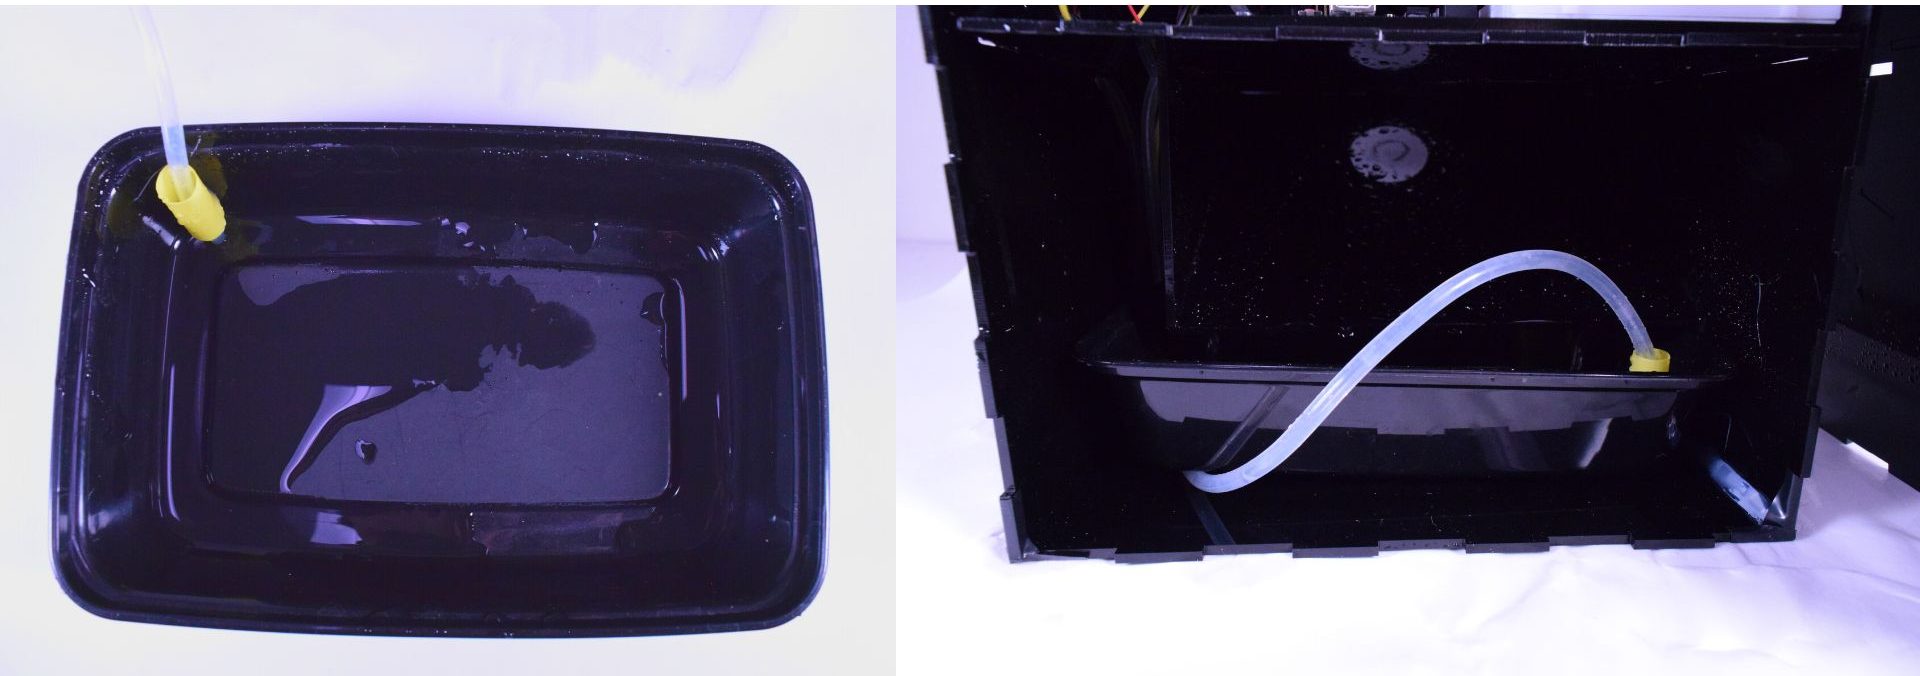 Two images side by side. Left: Top view of bottom water container that catches the water from the drain. Right: Side view of bottom water container in its correct position in the fountain.